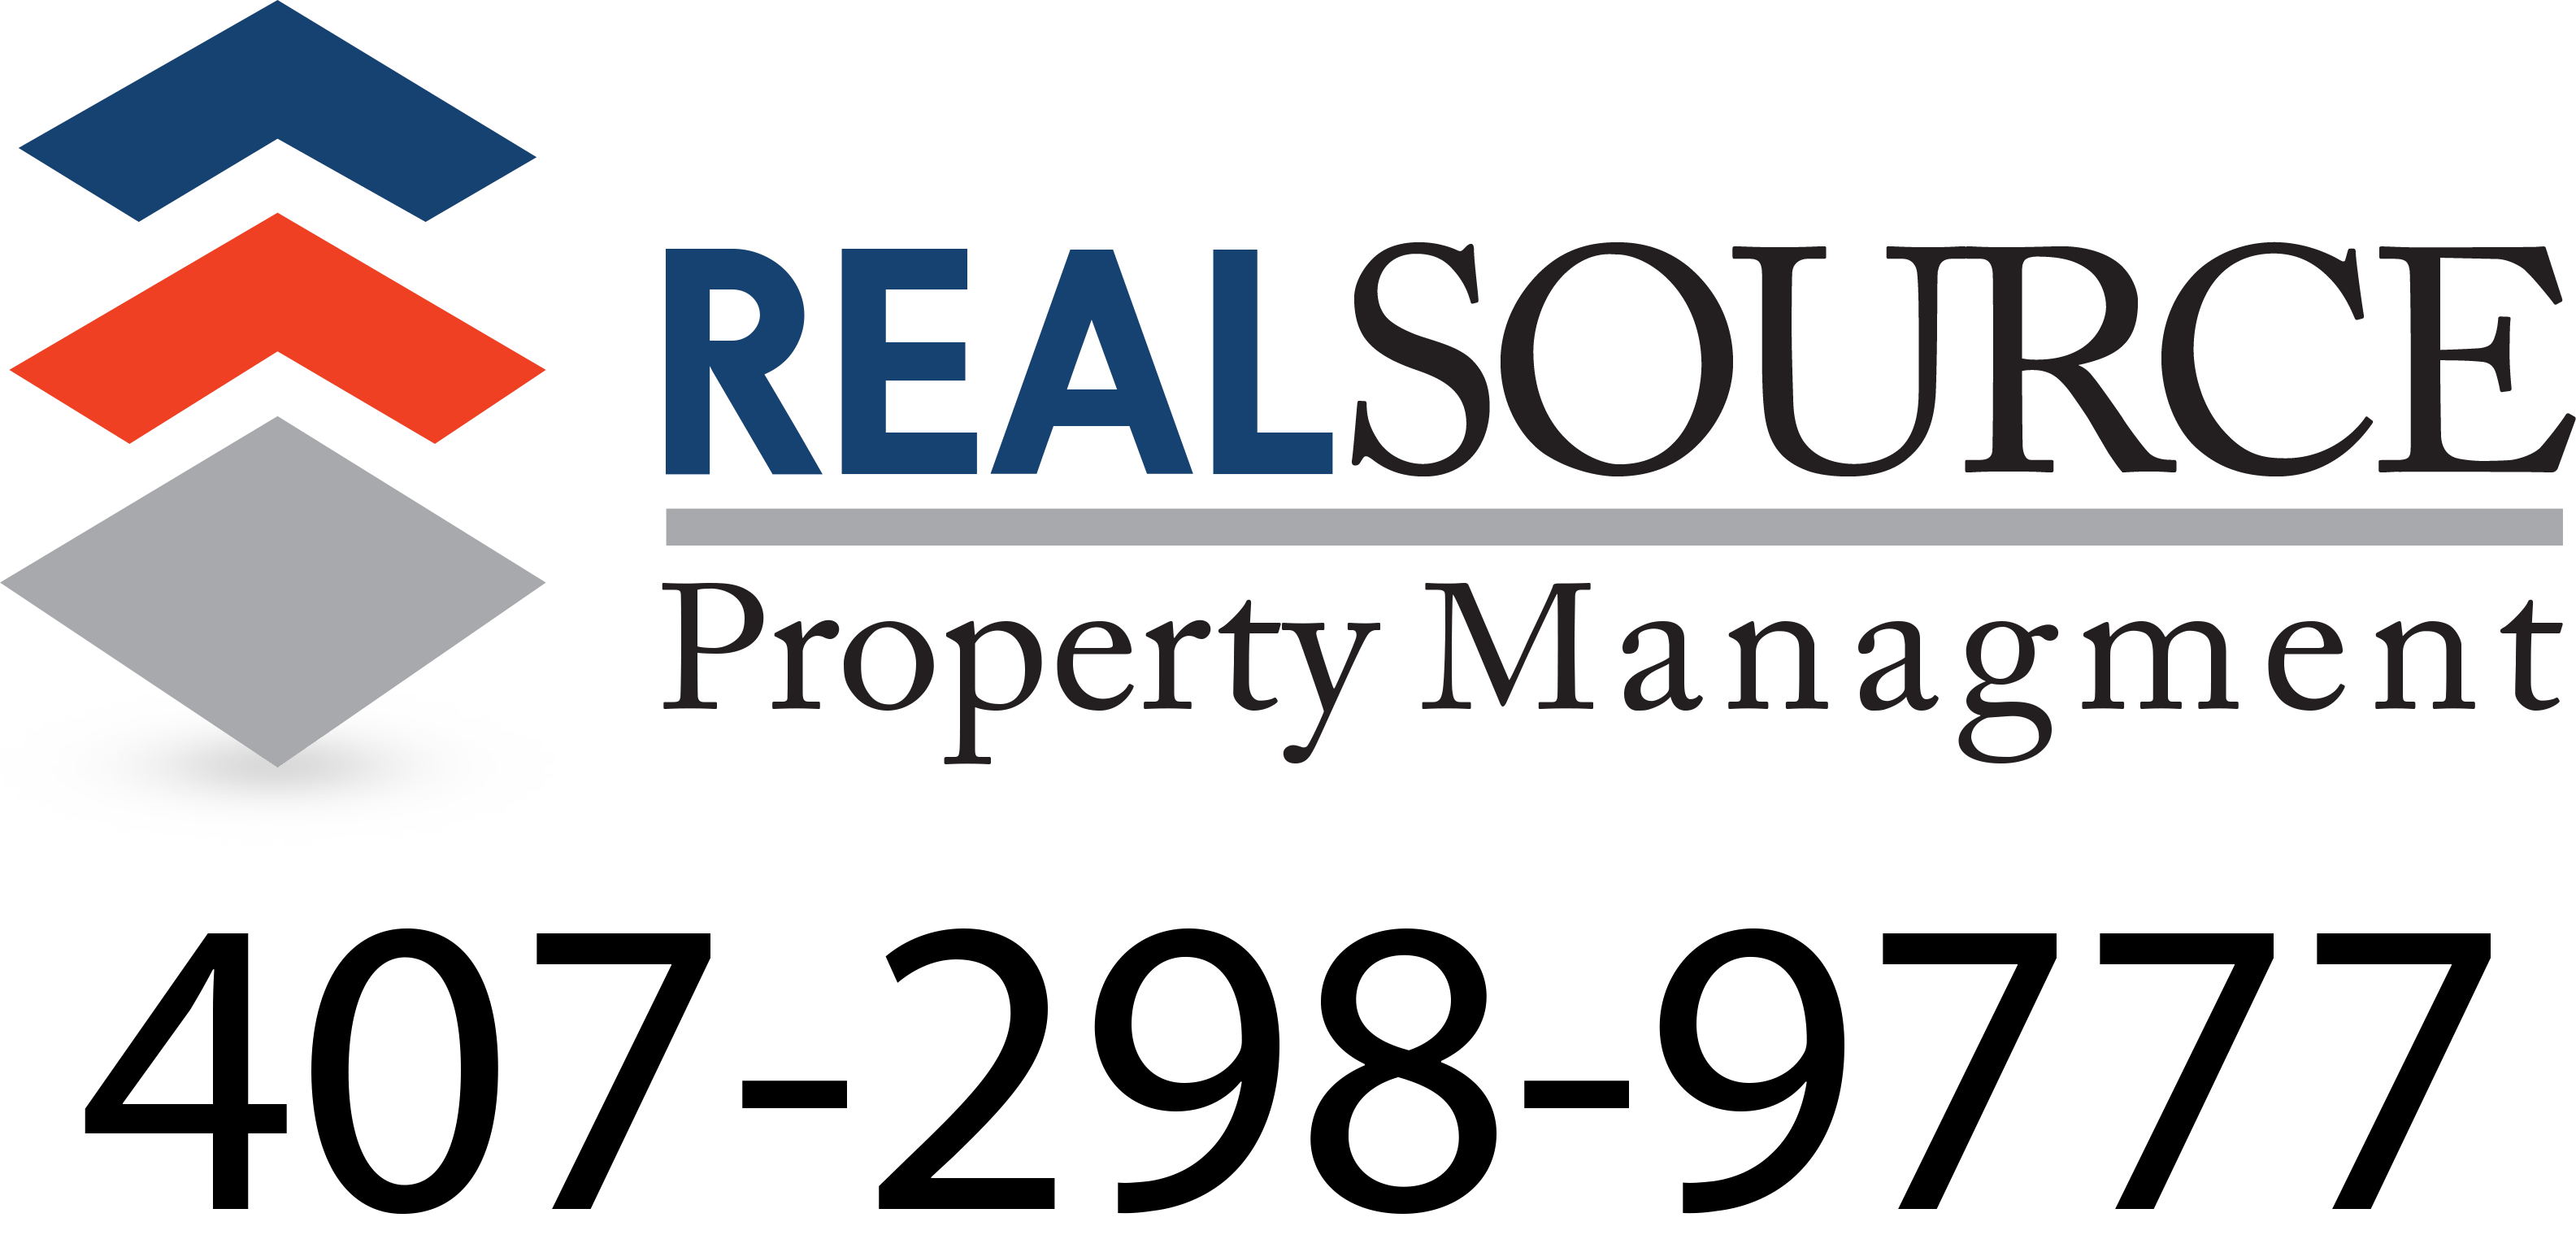 Realsource Property Management